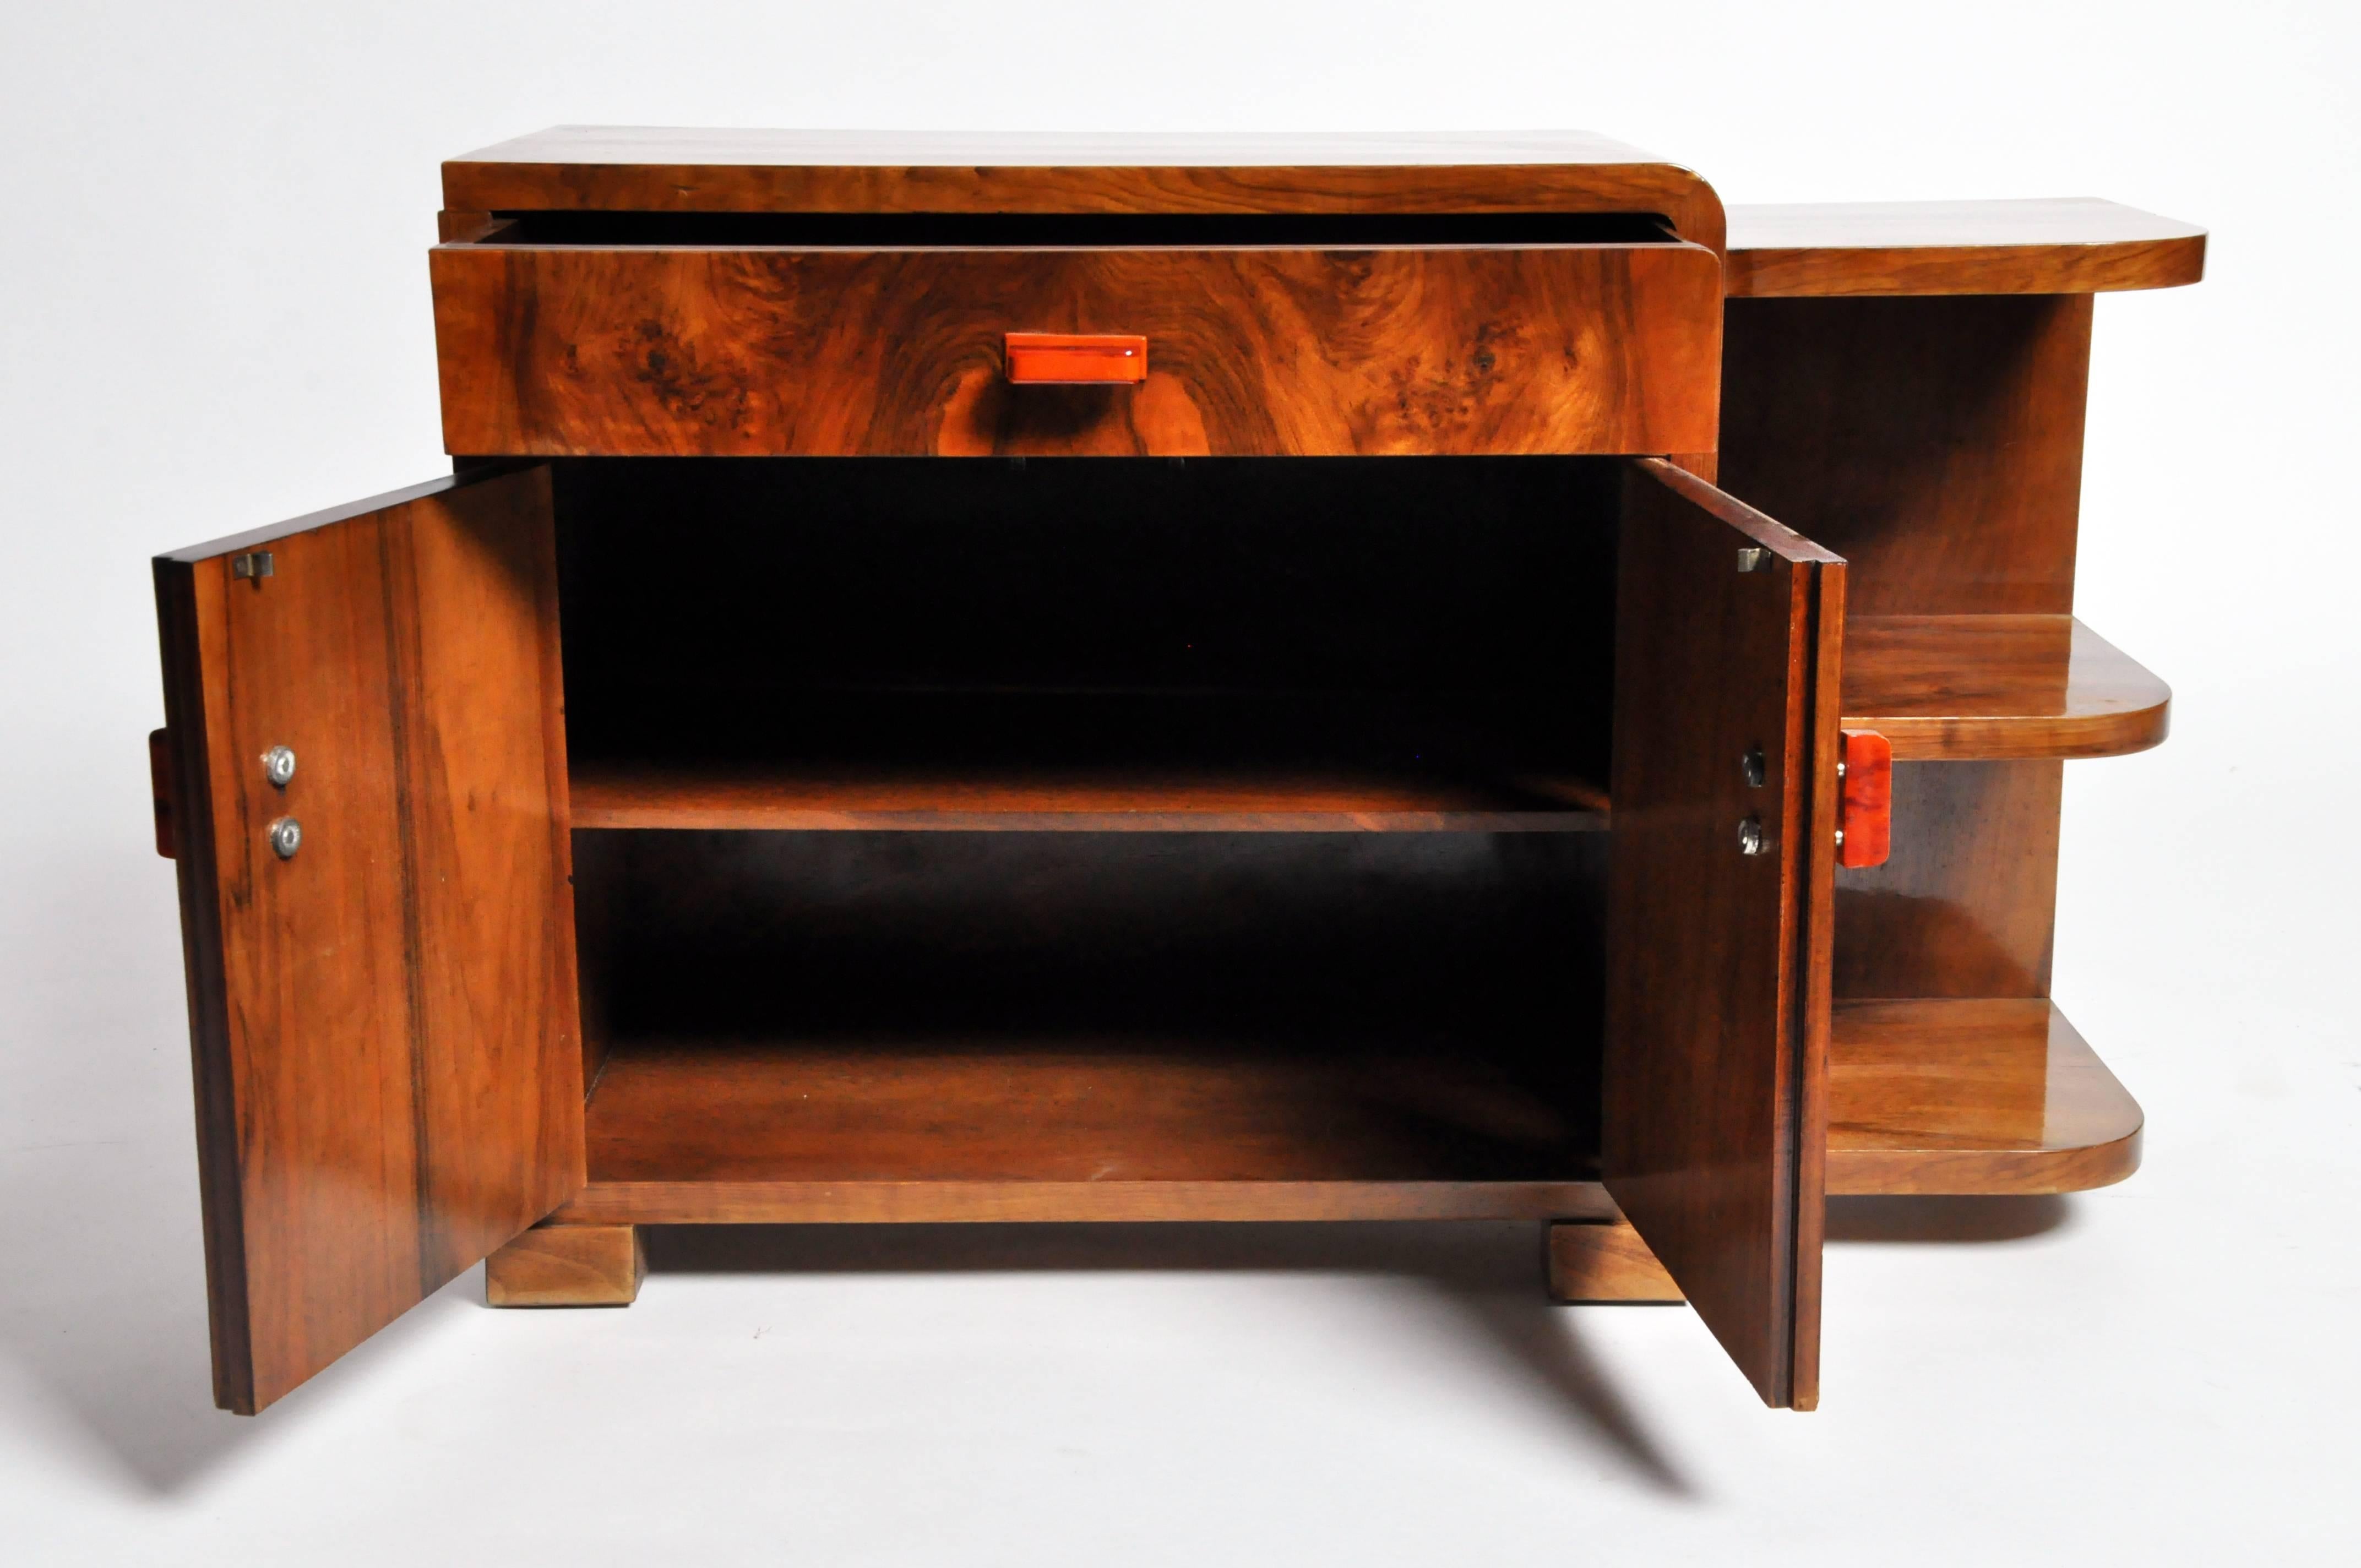 This high gloss deco side chest with drawer and shelves features stylish orange pulls and a beautiful burled walnut veneer. The sparing lines and gentle, curvilinearity of the shelves on this piece impart the sleek elegance of Europe’s historical